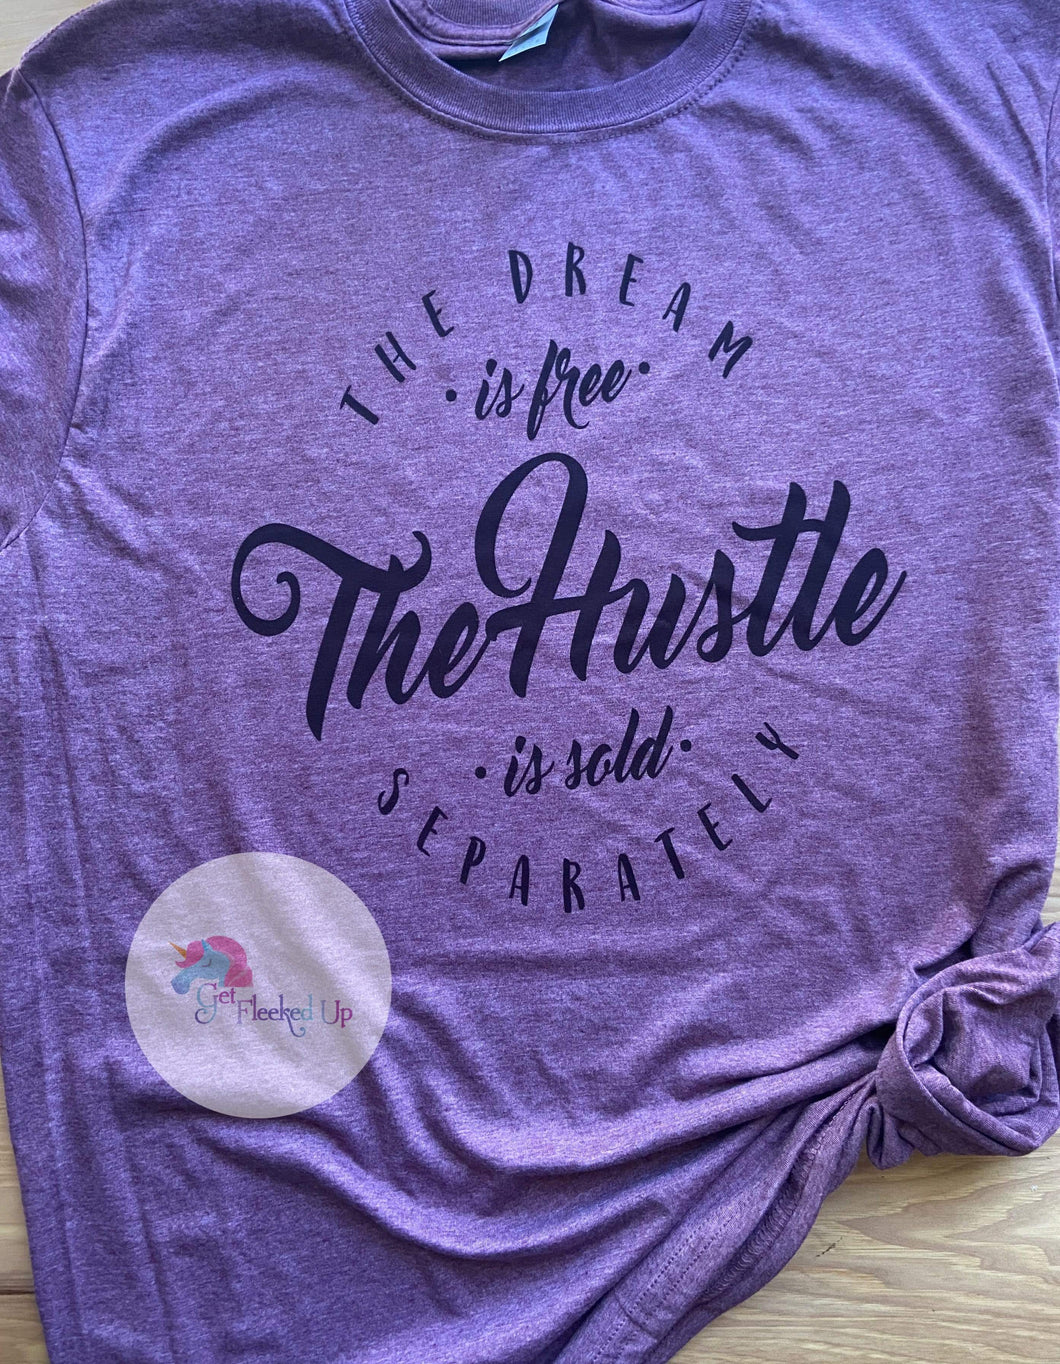 The dream is free the hustle is sold separately T-shirt - Get Fleeked Up